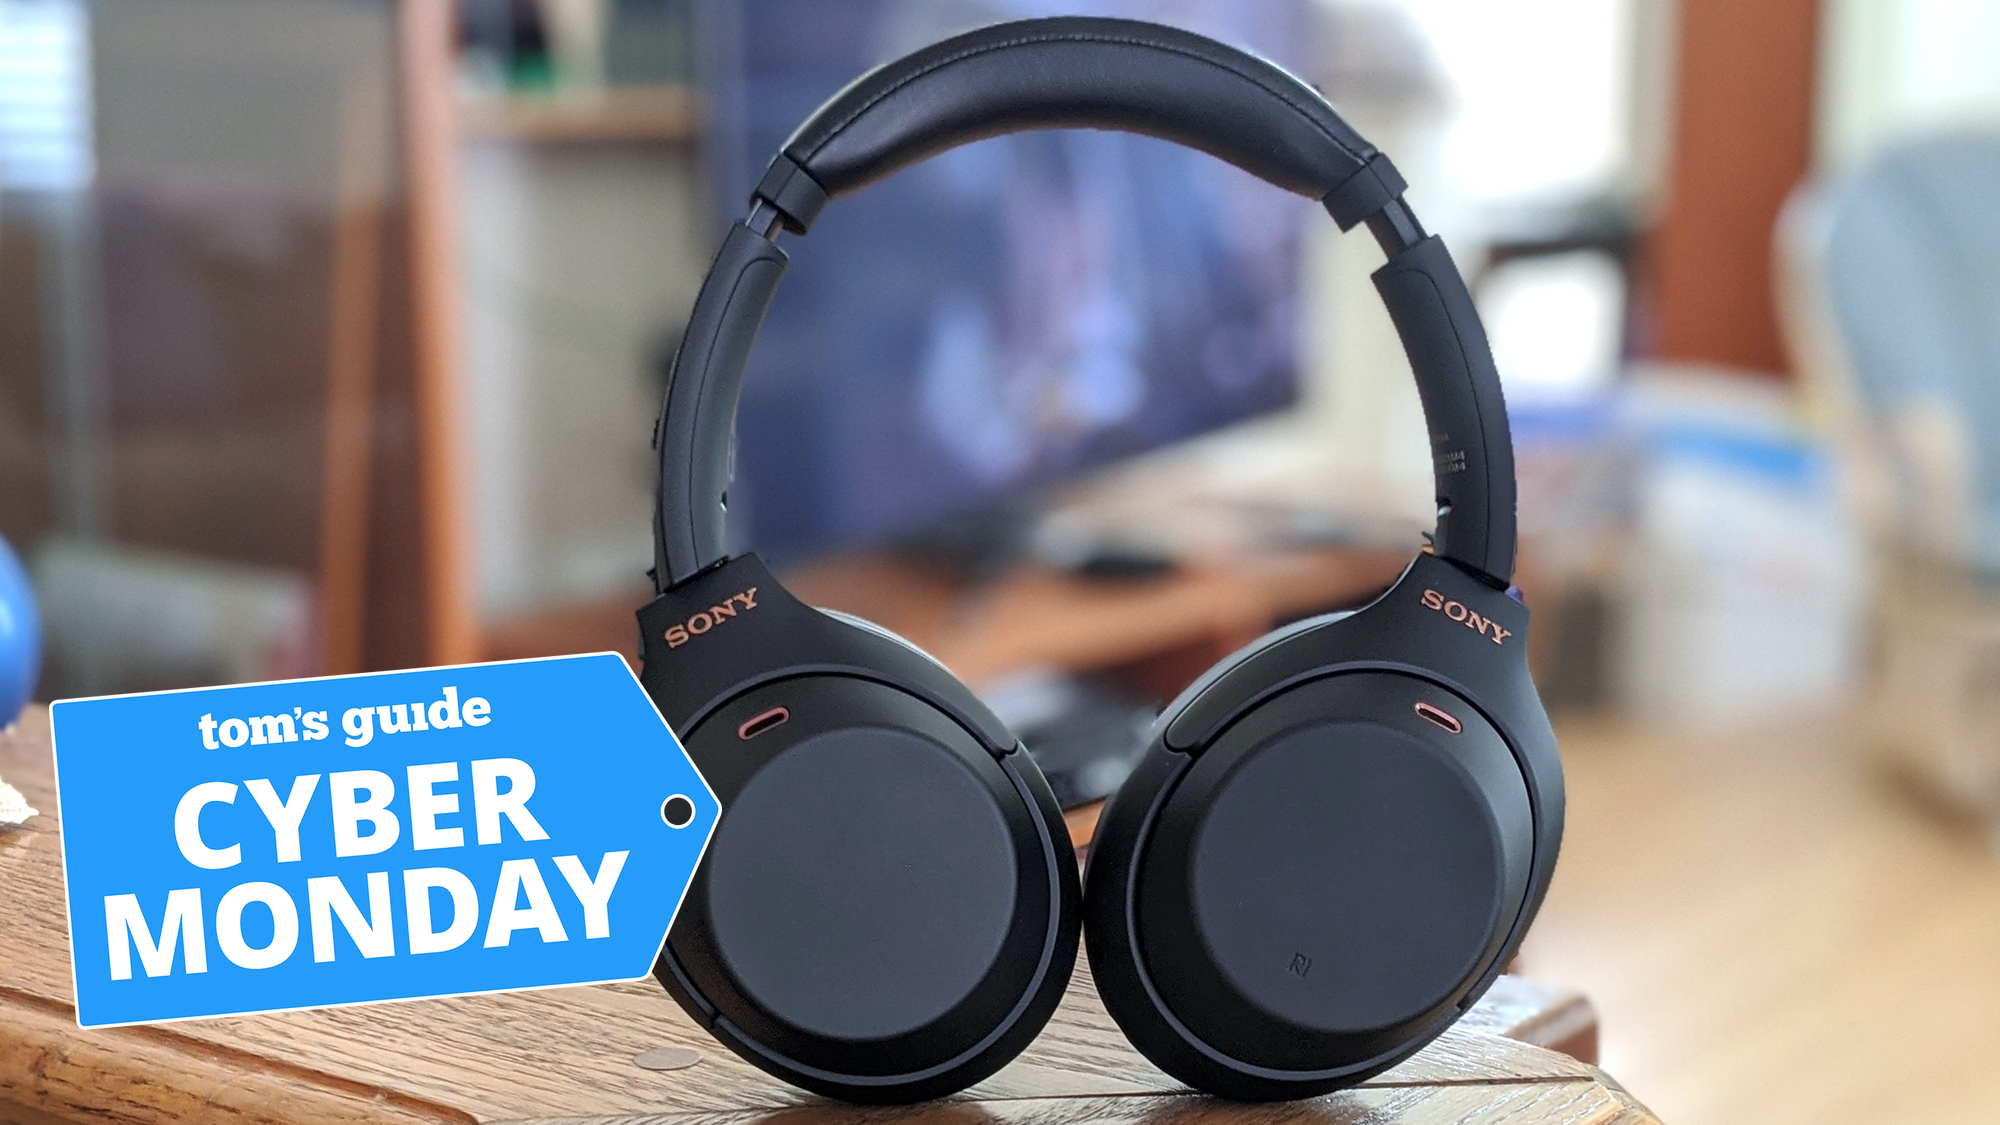 The Sony WH-1000XM4 headphones with a Cyber Monday badge